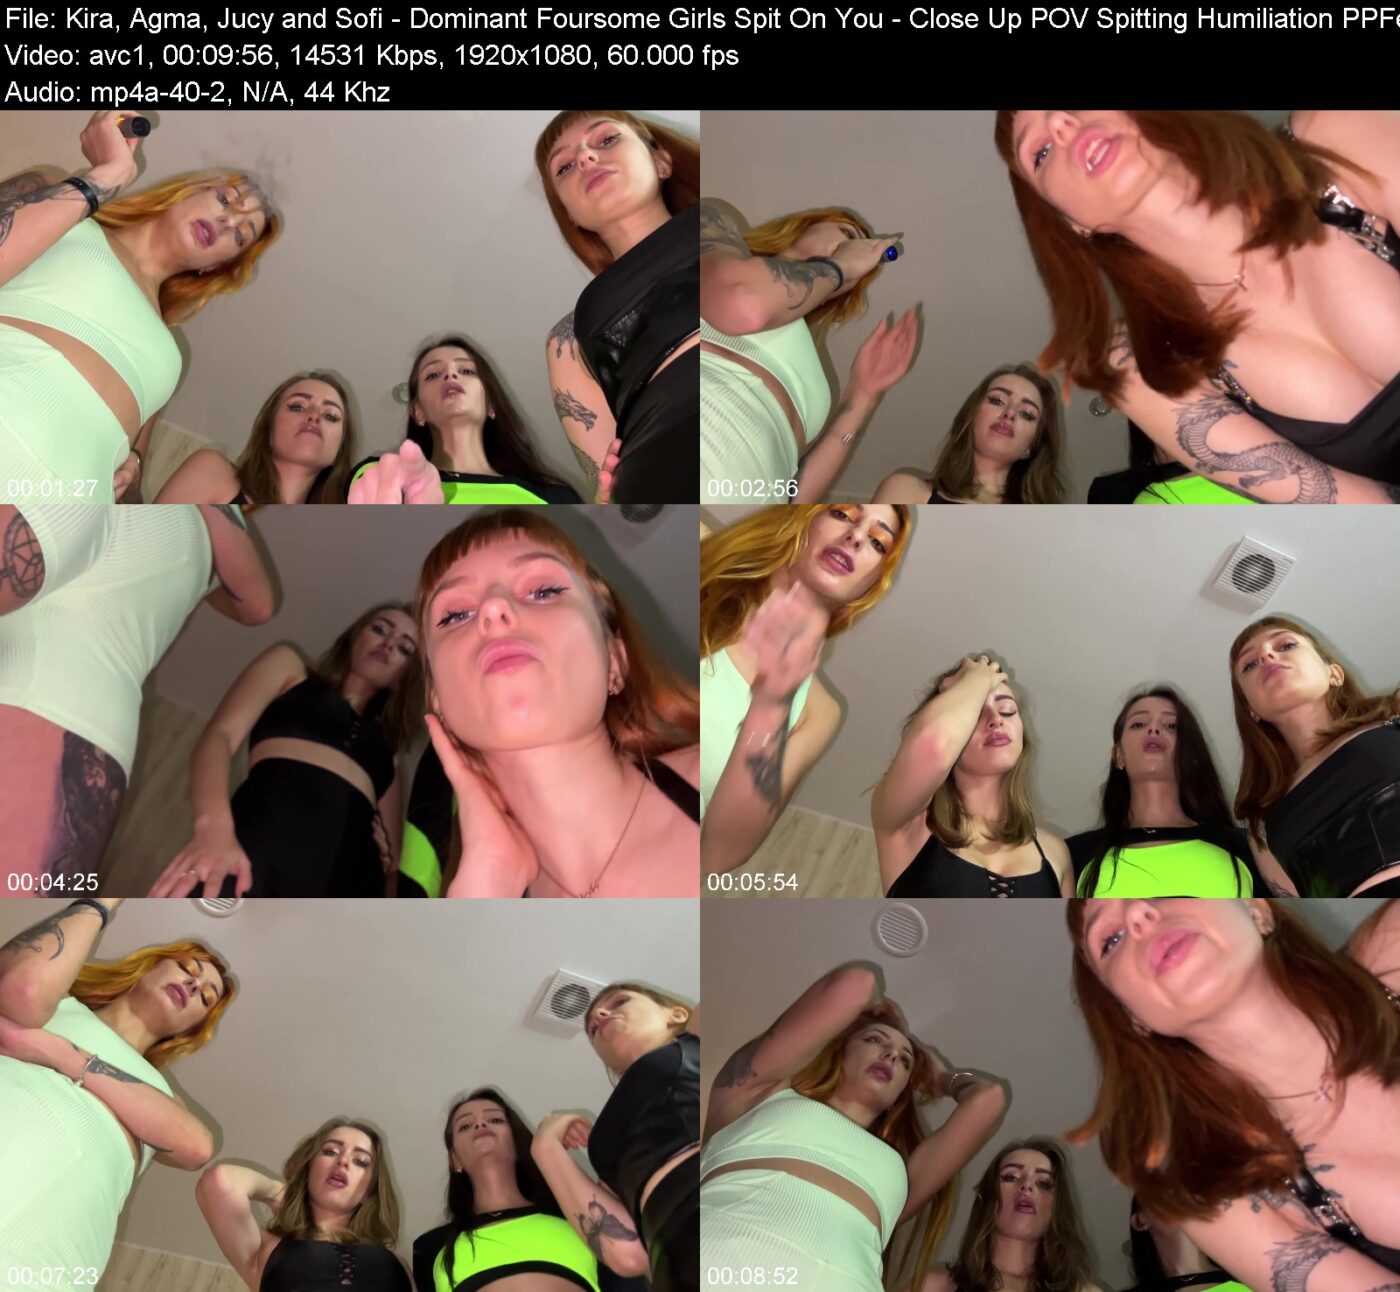 Actress: Kira, Agma, Jucy and Sofi. Title and Studio: Dominant Foursome Girls Spit On You – Close Up POV Spitting Humiliation PPFemdom